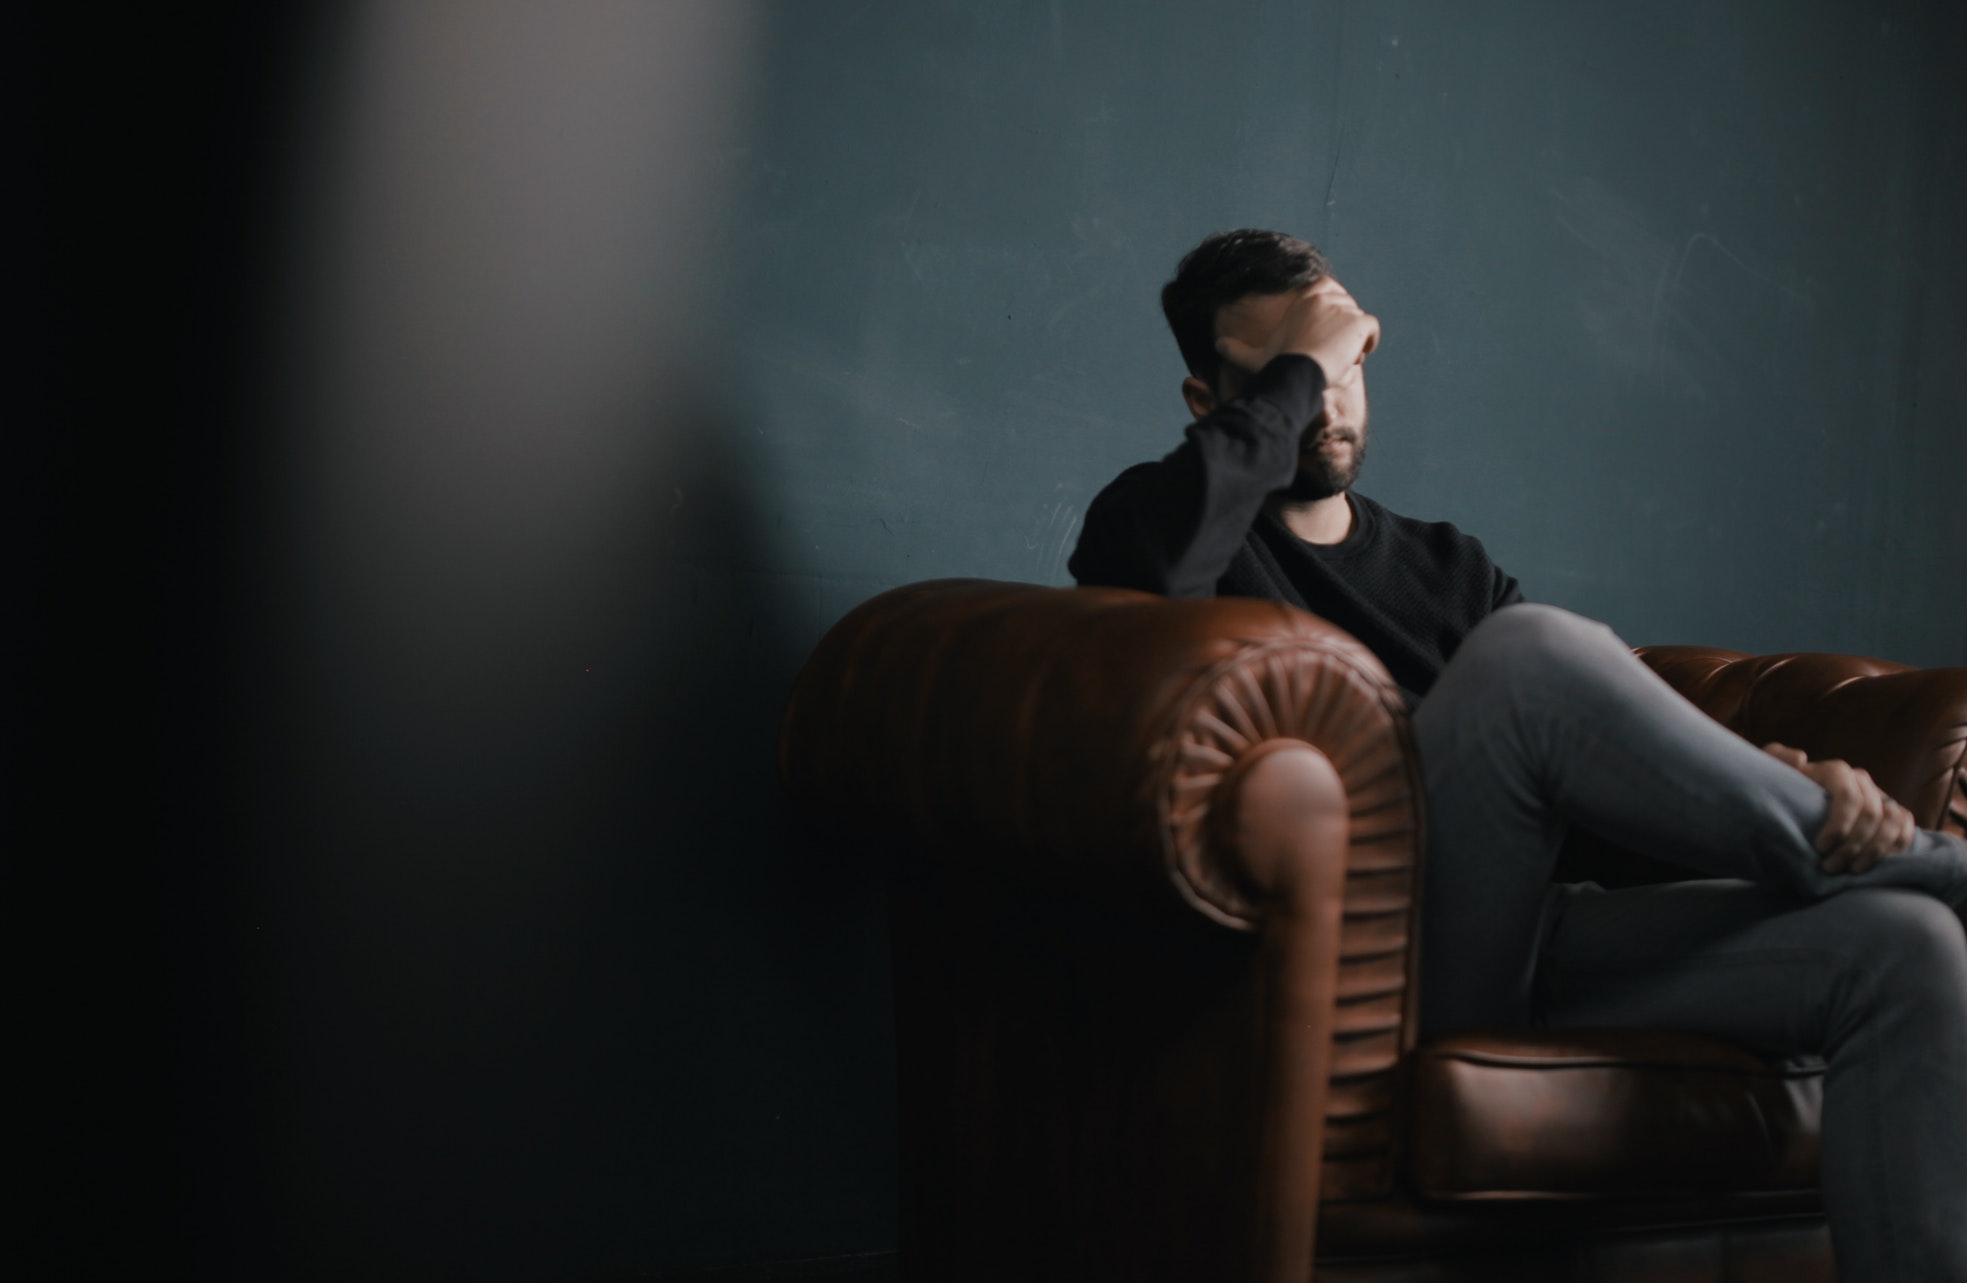 <p>If your heart is calling you to help people get treatment for their substance abuse disorders, you may be interested in becoming a substance abuse disorder counselor.</p>